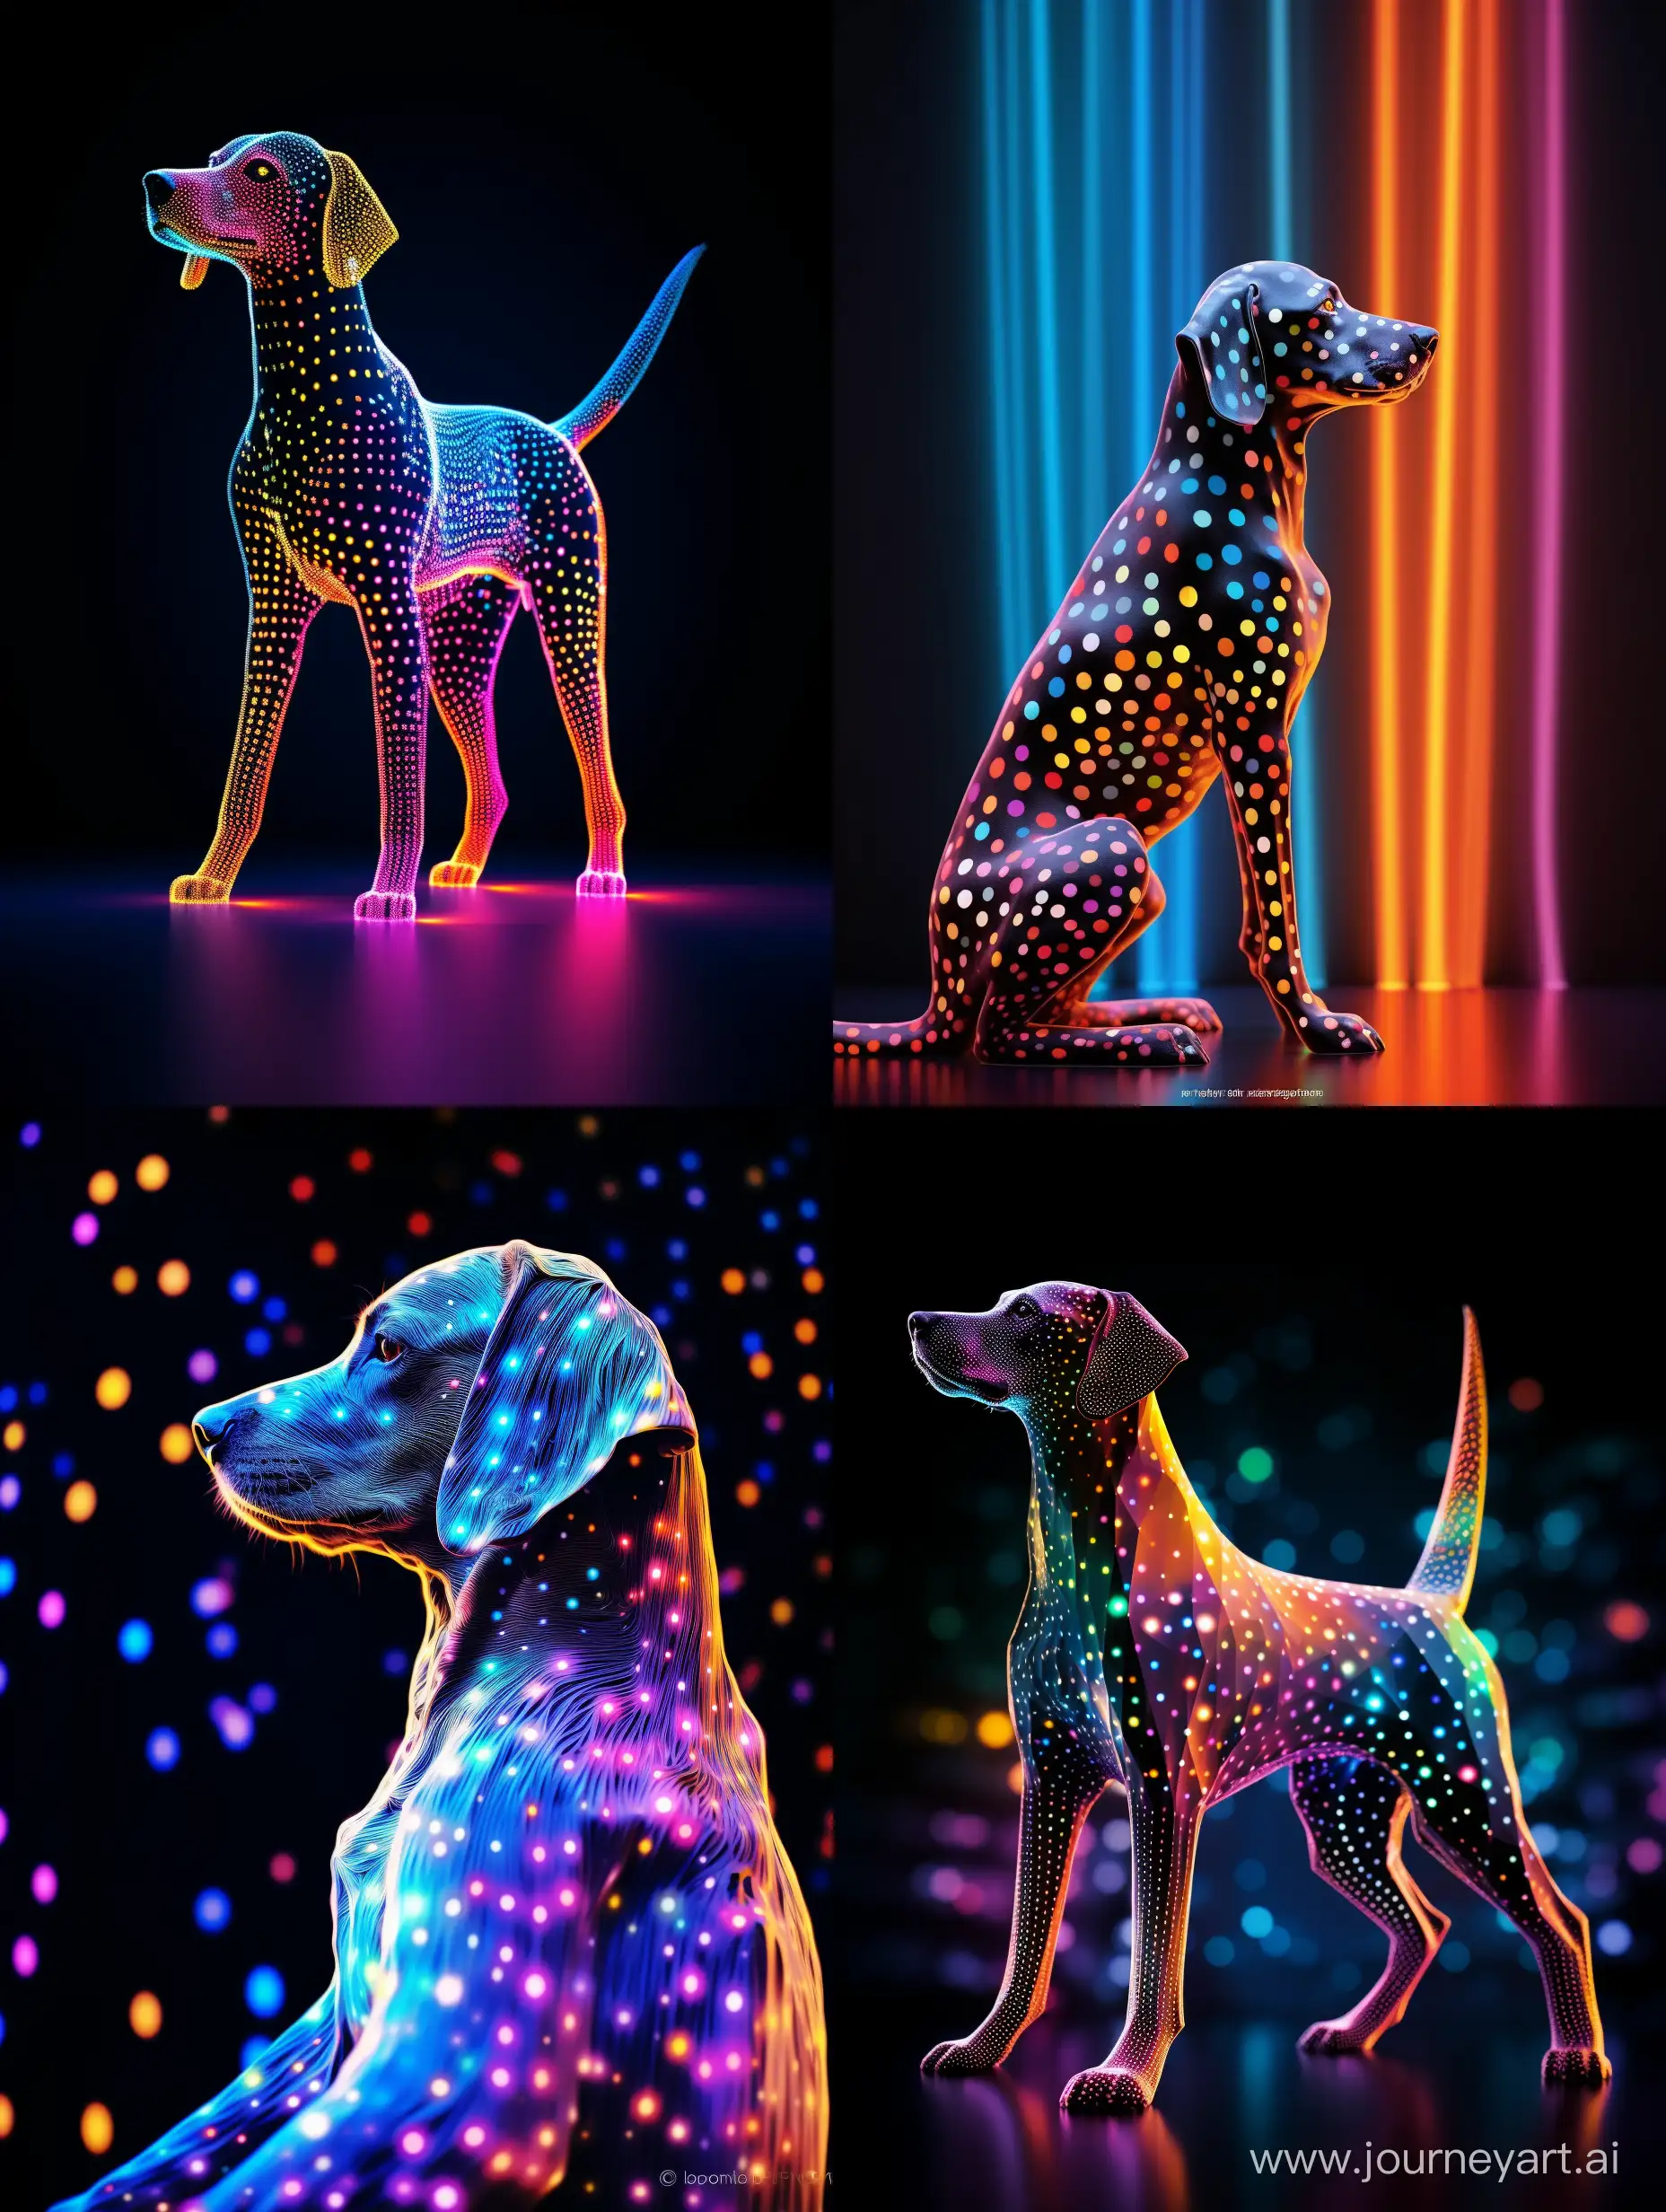 Vibrant-Neon-Dog-Silhouette-with-Electronic-Devices-in-Ultra-Long-Exposure-Photography